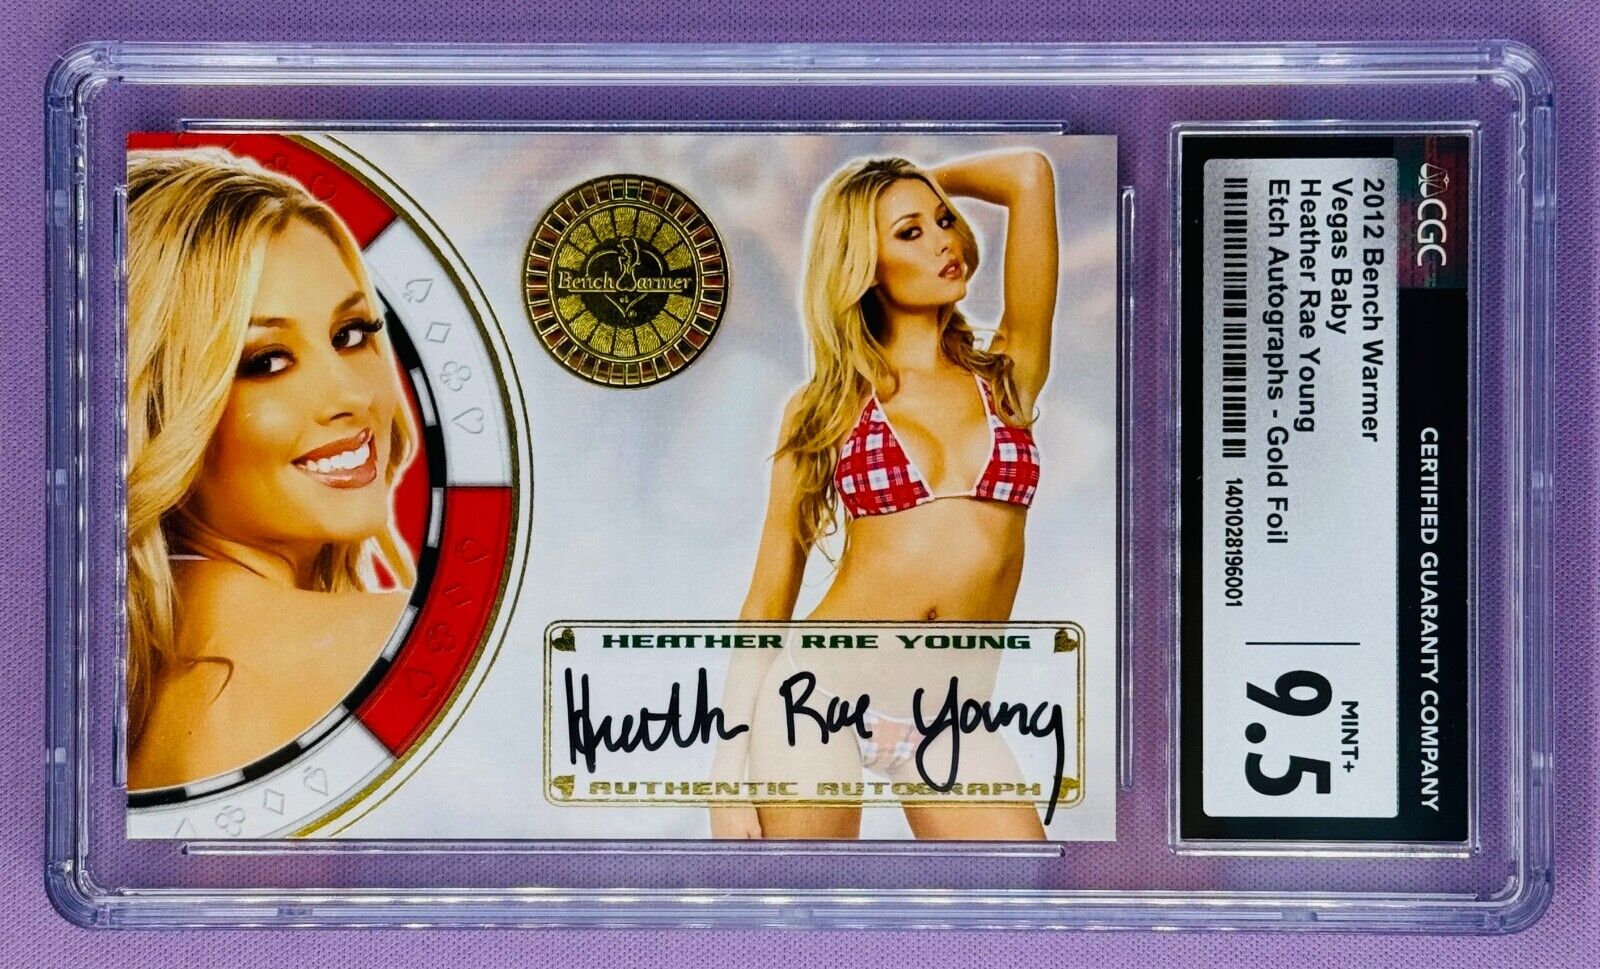 2012 Bench Warmer Vegas Baby Heather Rae Young Gold Foil Auto CGC 9.5 Mint+